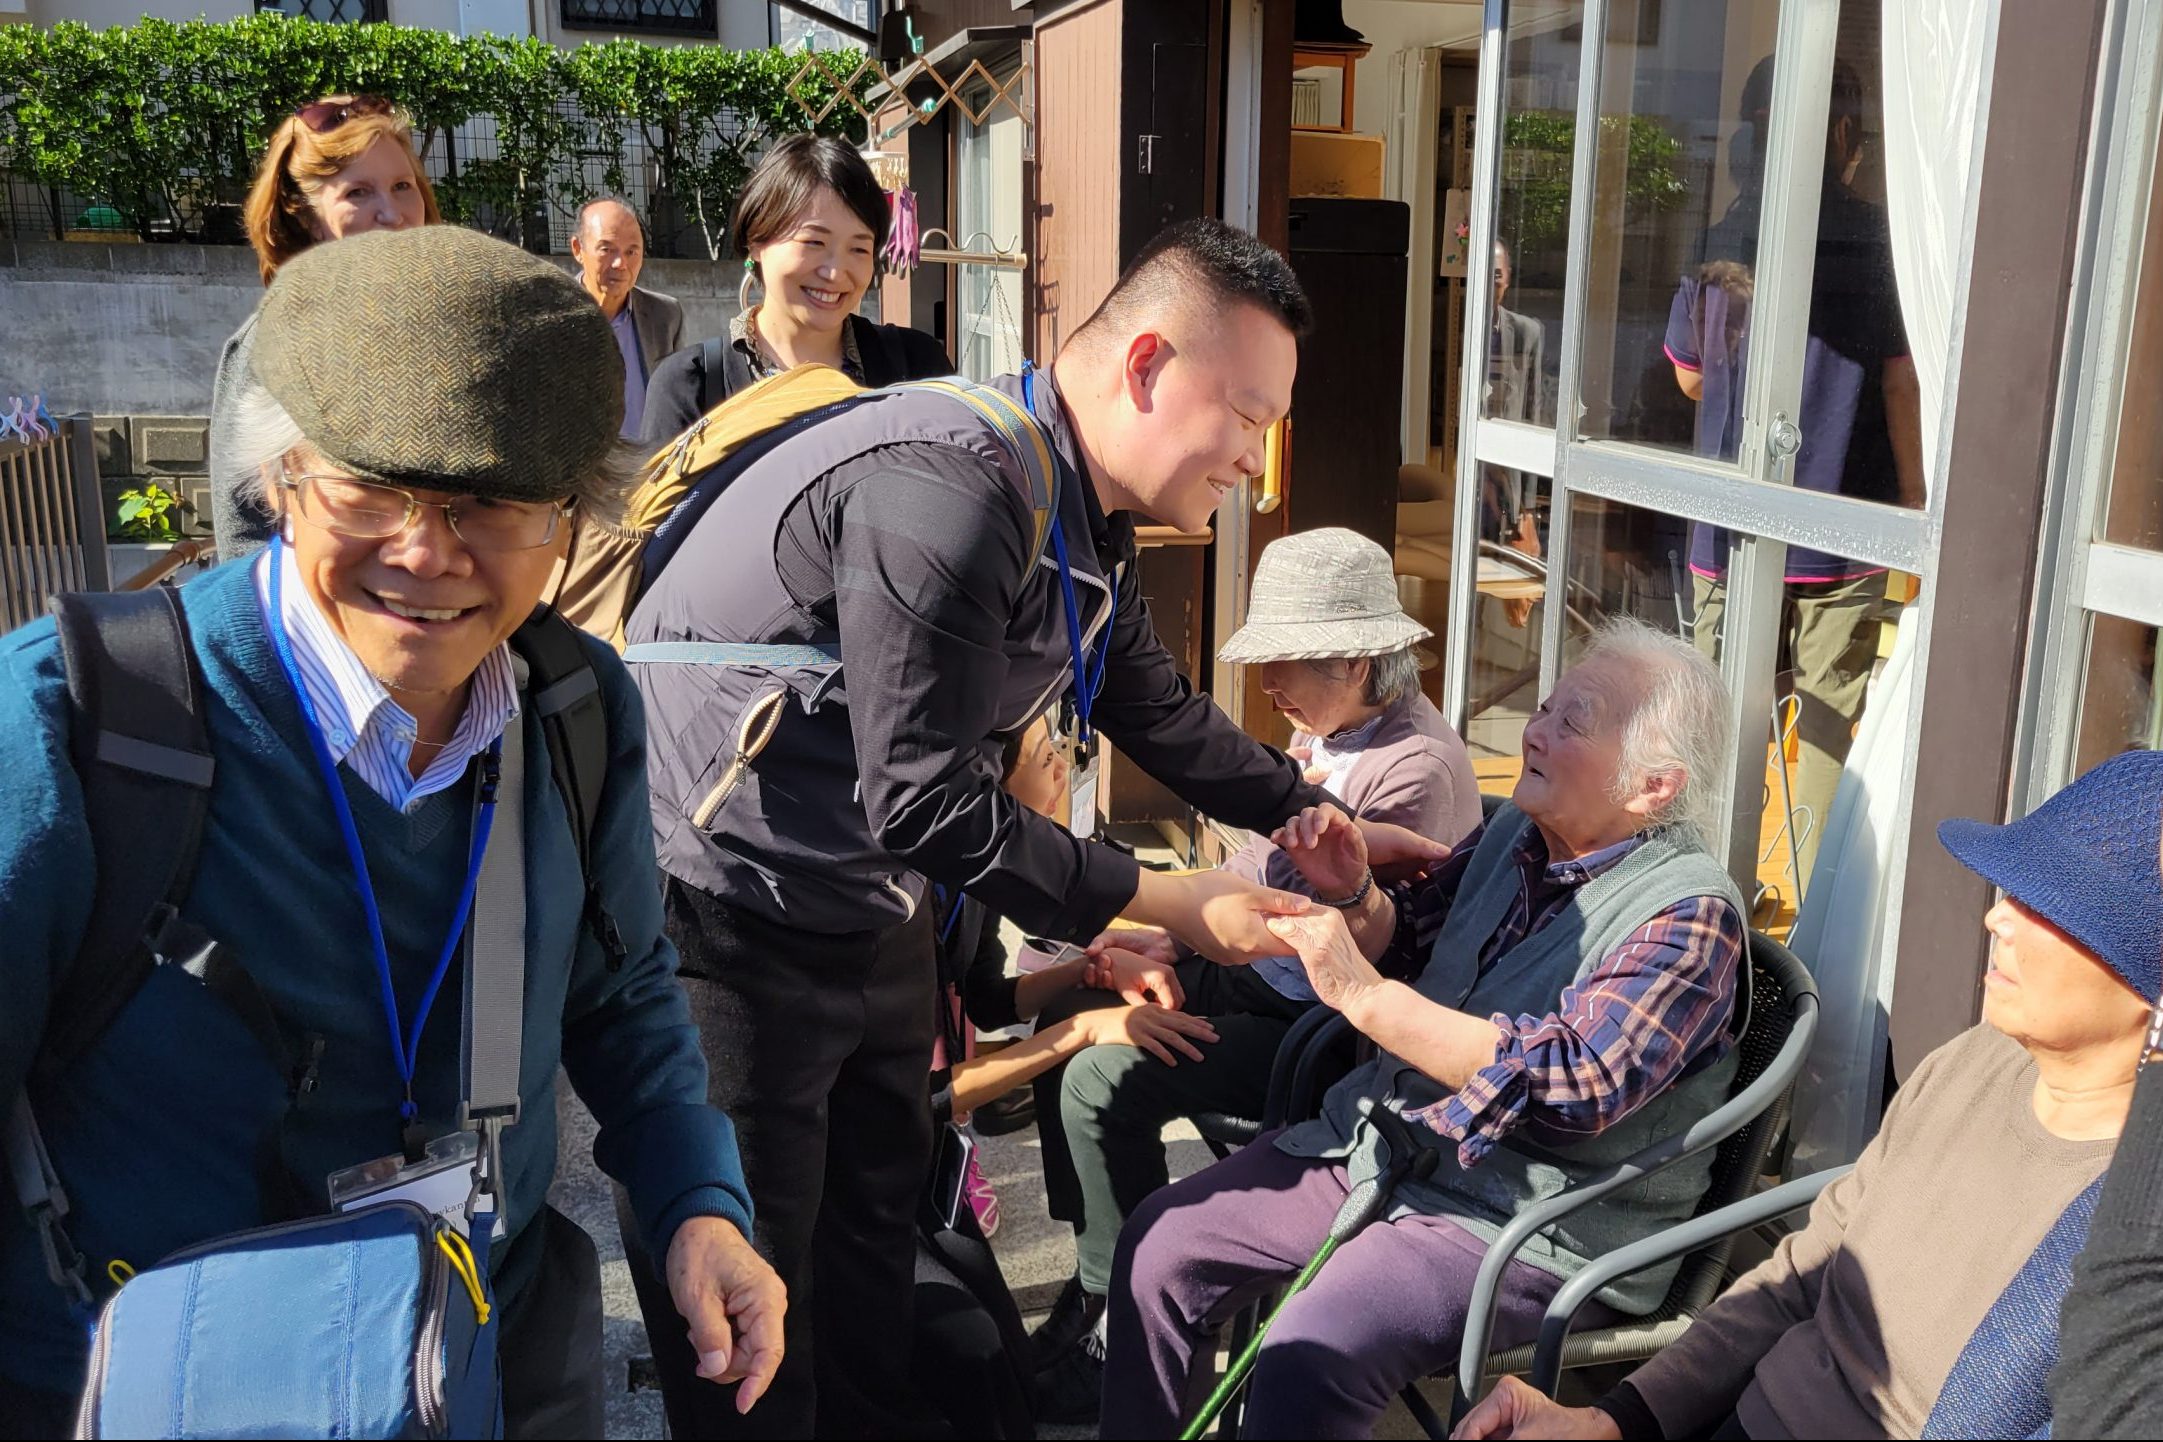 Participants chatting with older people at Imaizumi care center